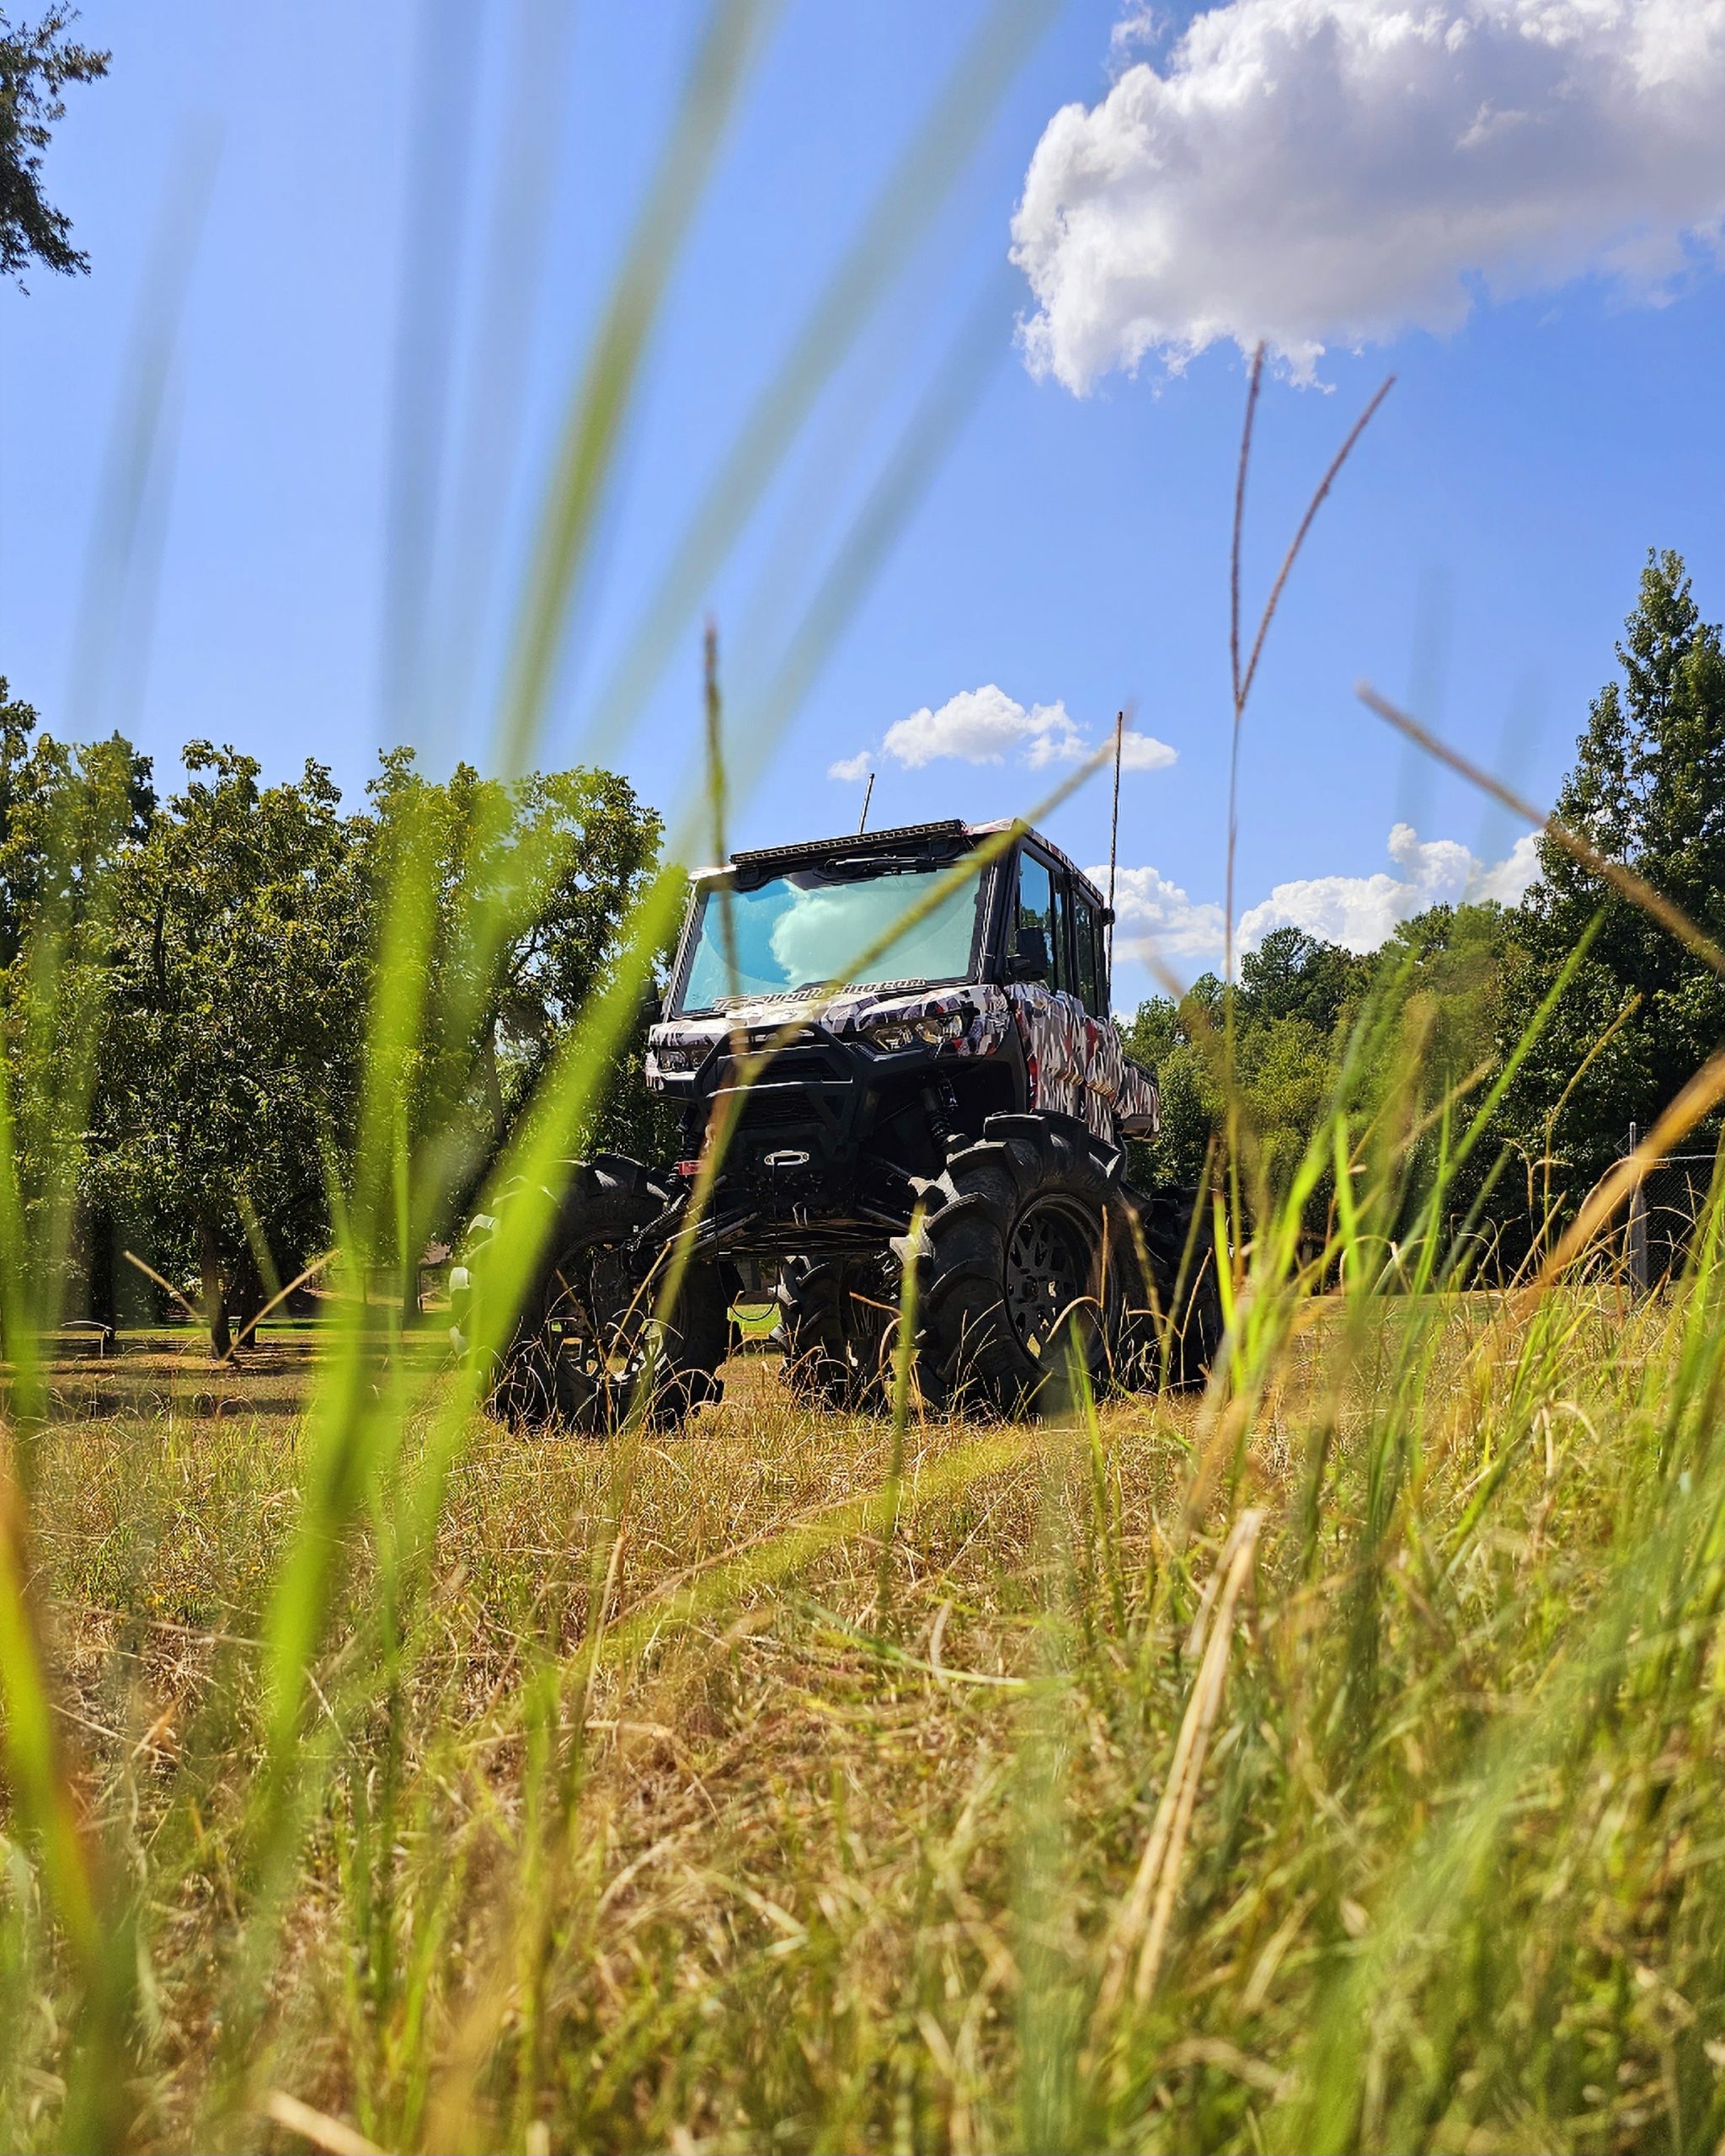 Custom Aftermarket Can-Am Defender Photo In Grass Field